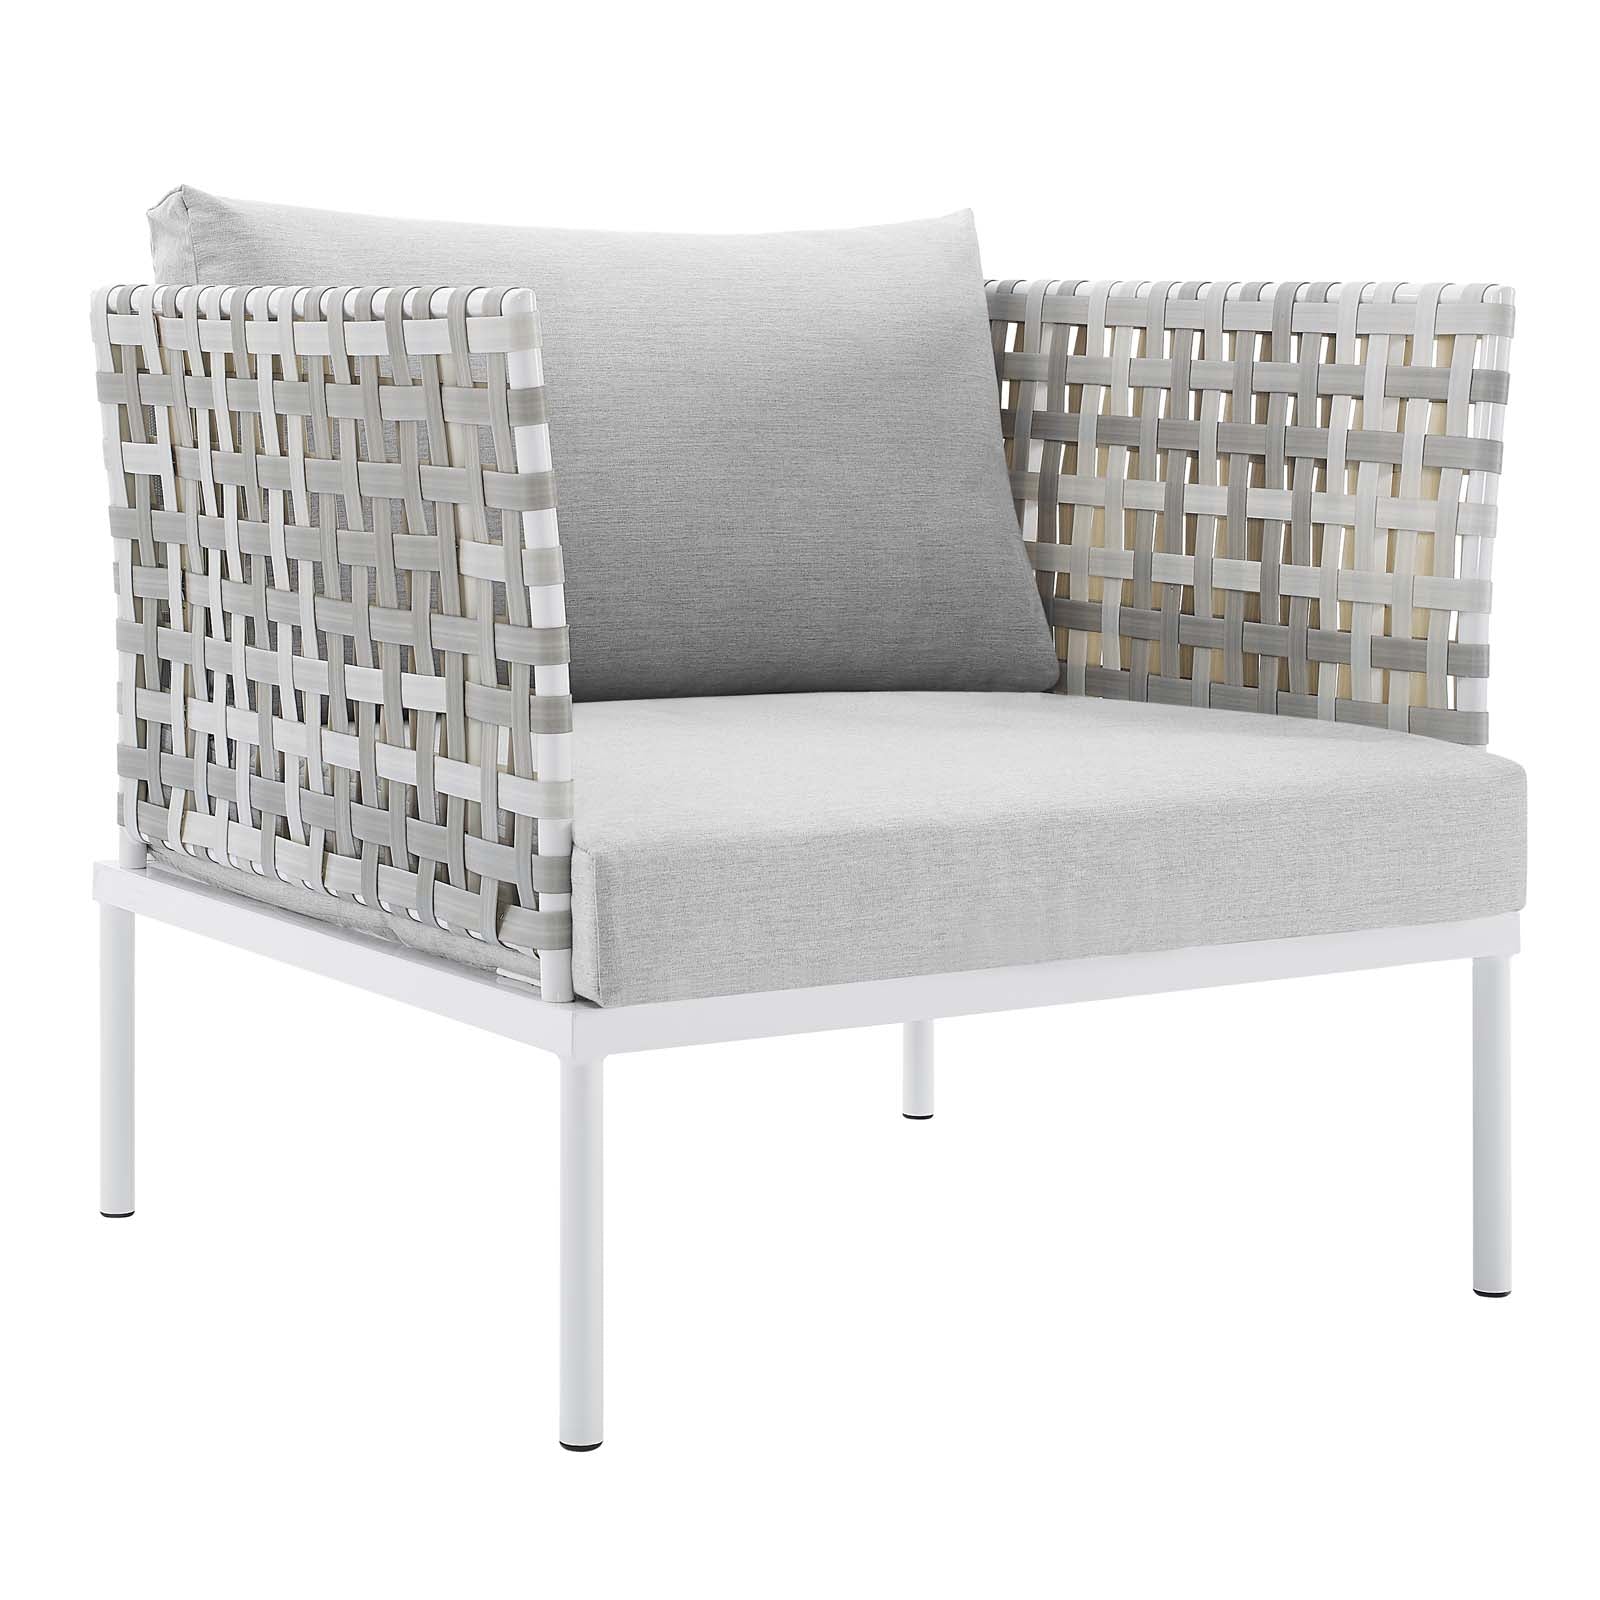 Modway Outdoor Chairs - Harmony Sunbrella Basket Weave Outdoor Patio Aluminum Armchair Taupe Gray